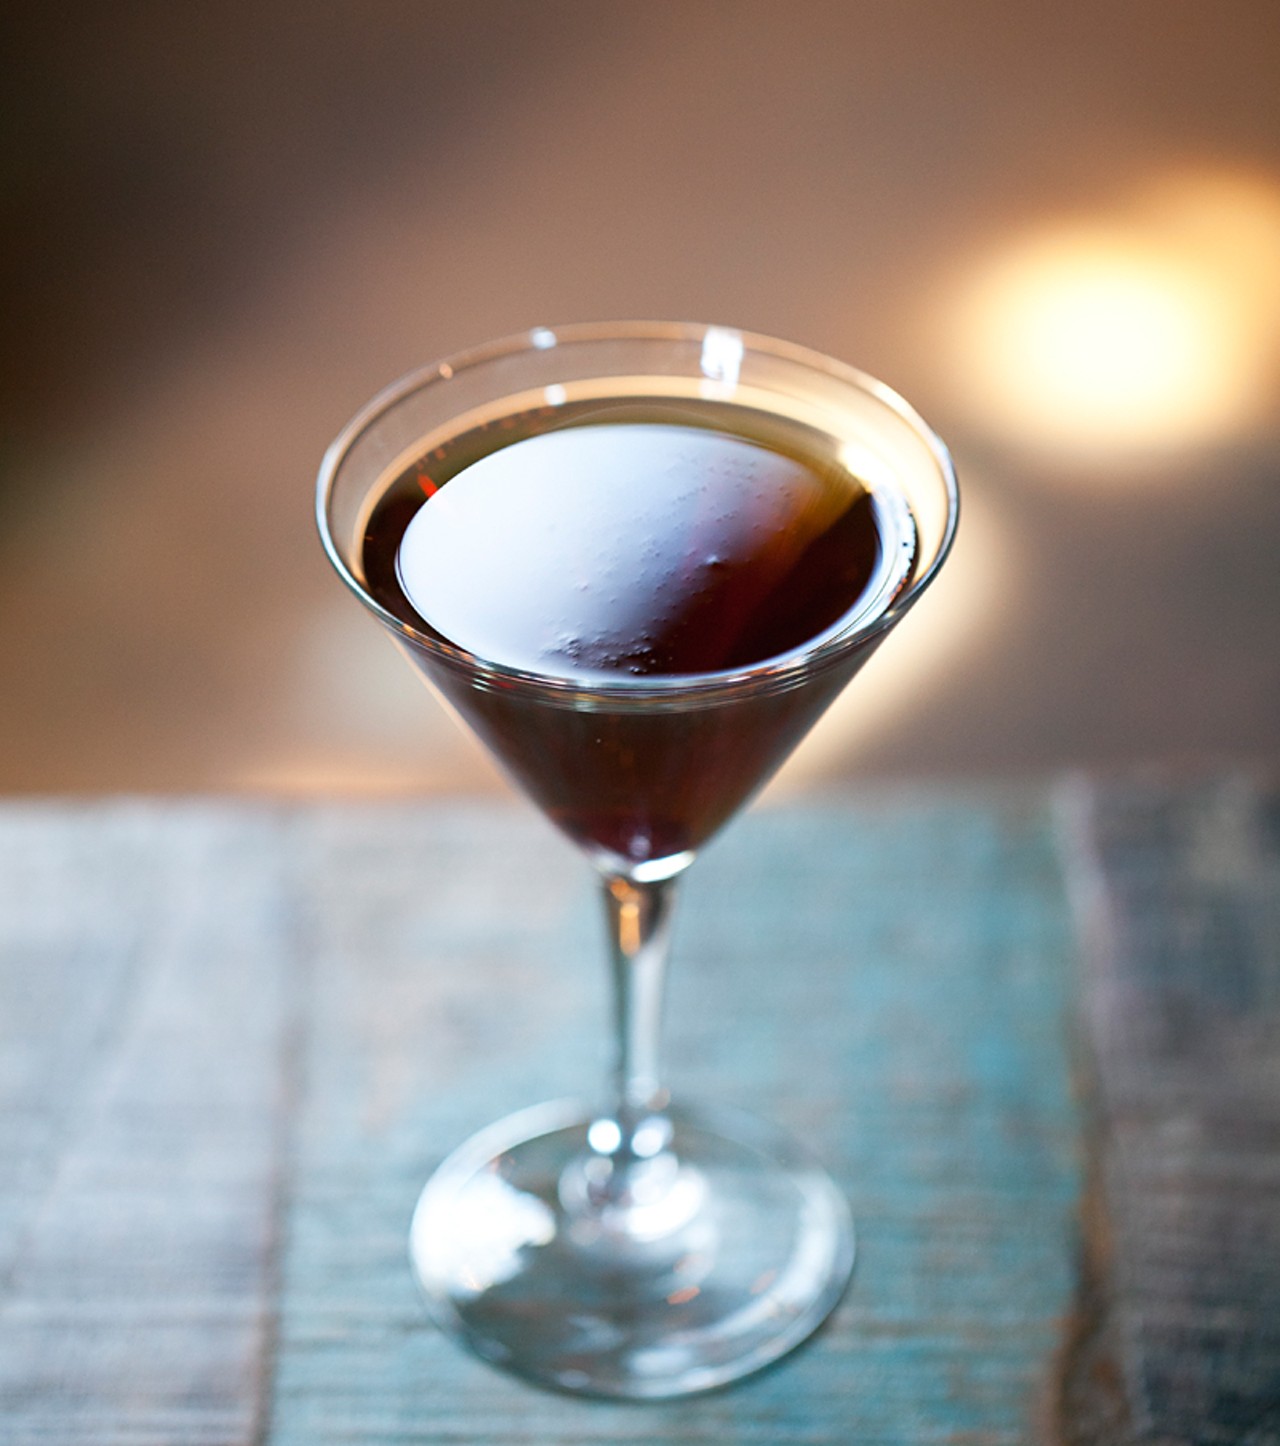 The "Manhattan on Tap" is Heaven Hill bourbon, Cocchi Torino and Angostura bitters.